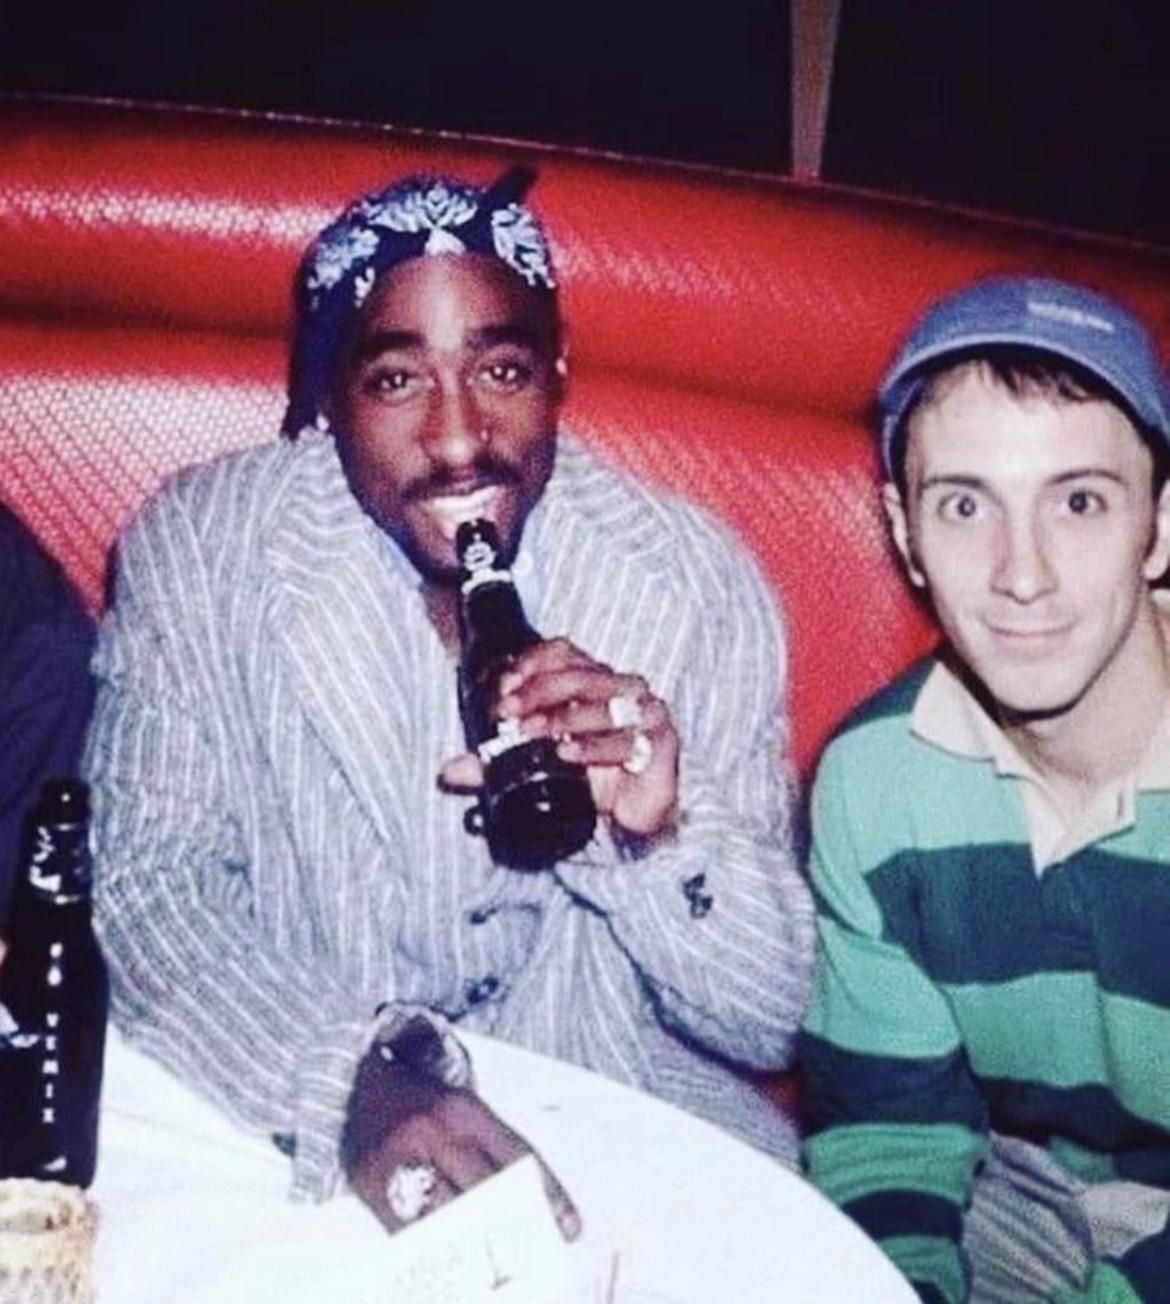 A young Eminem meets Tupac,